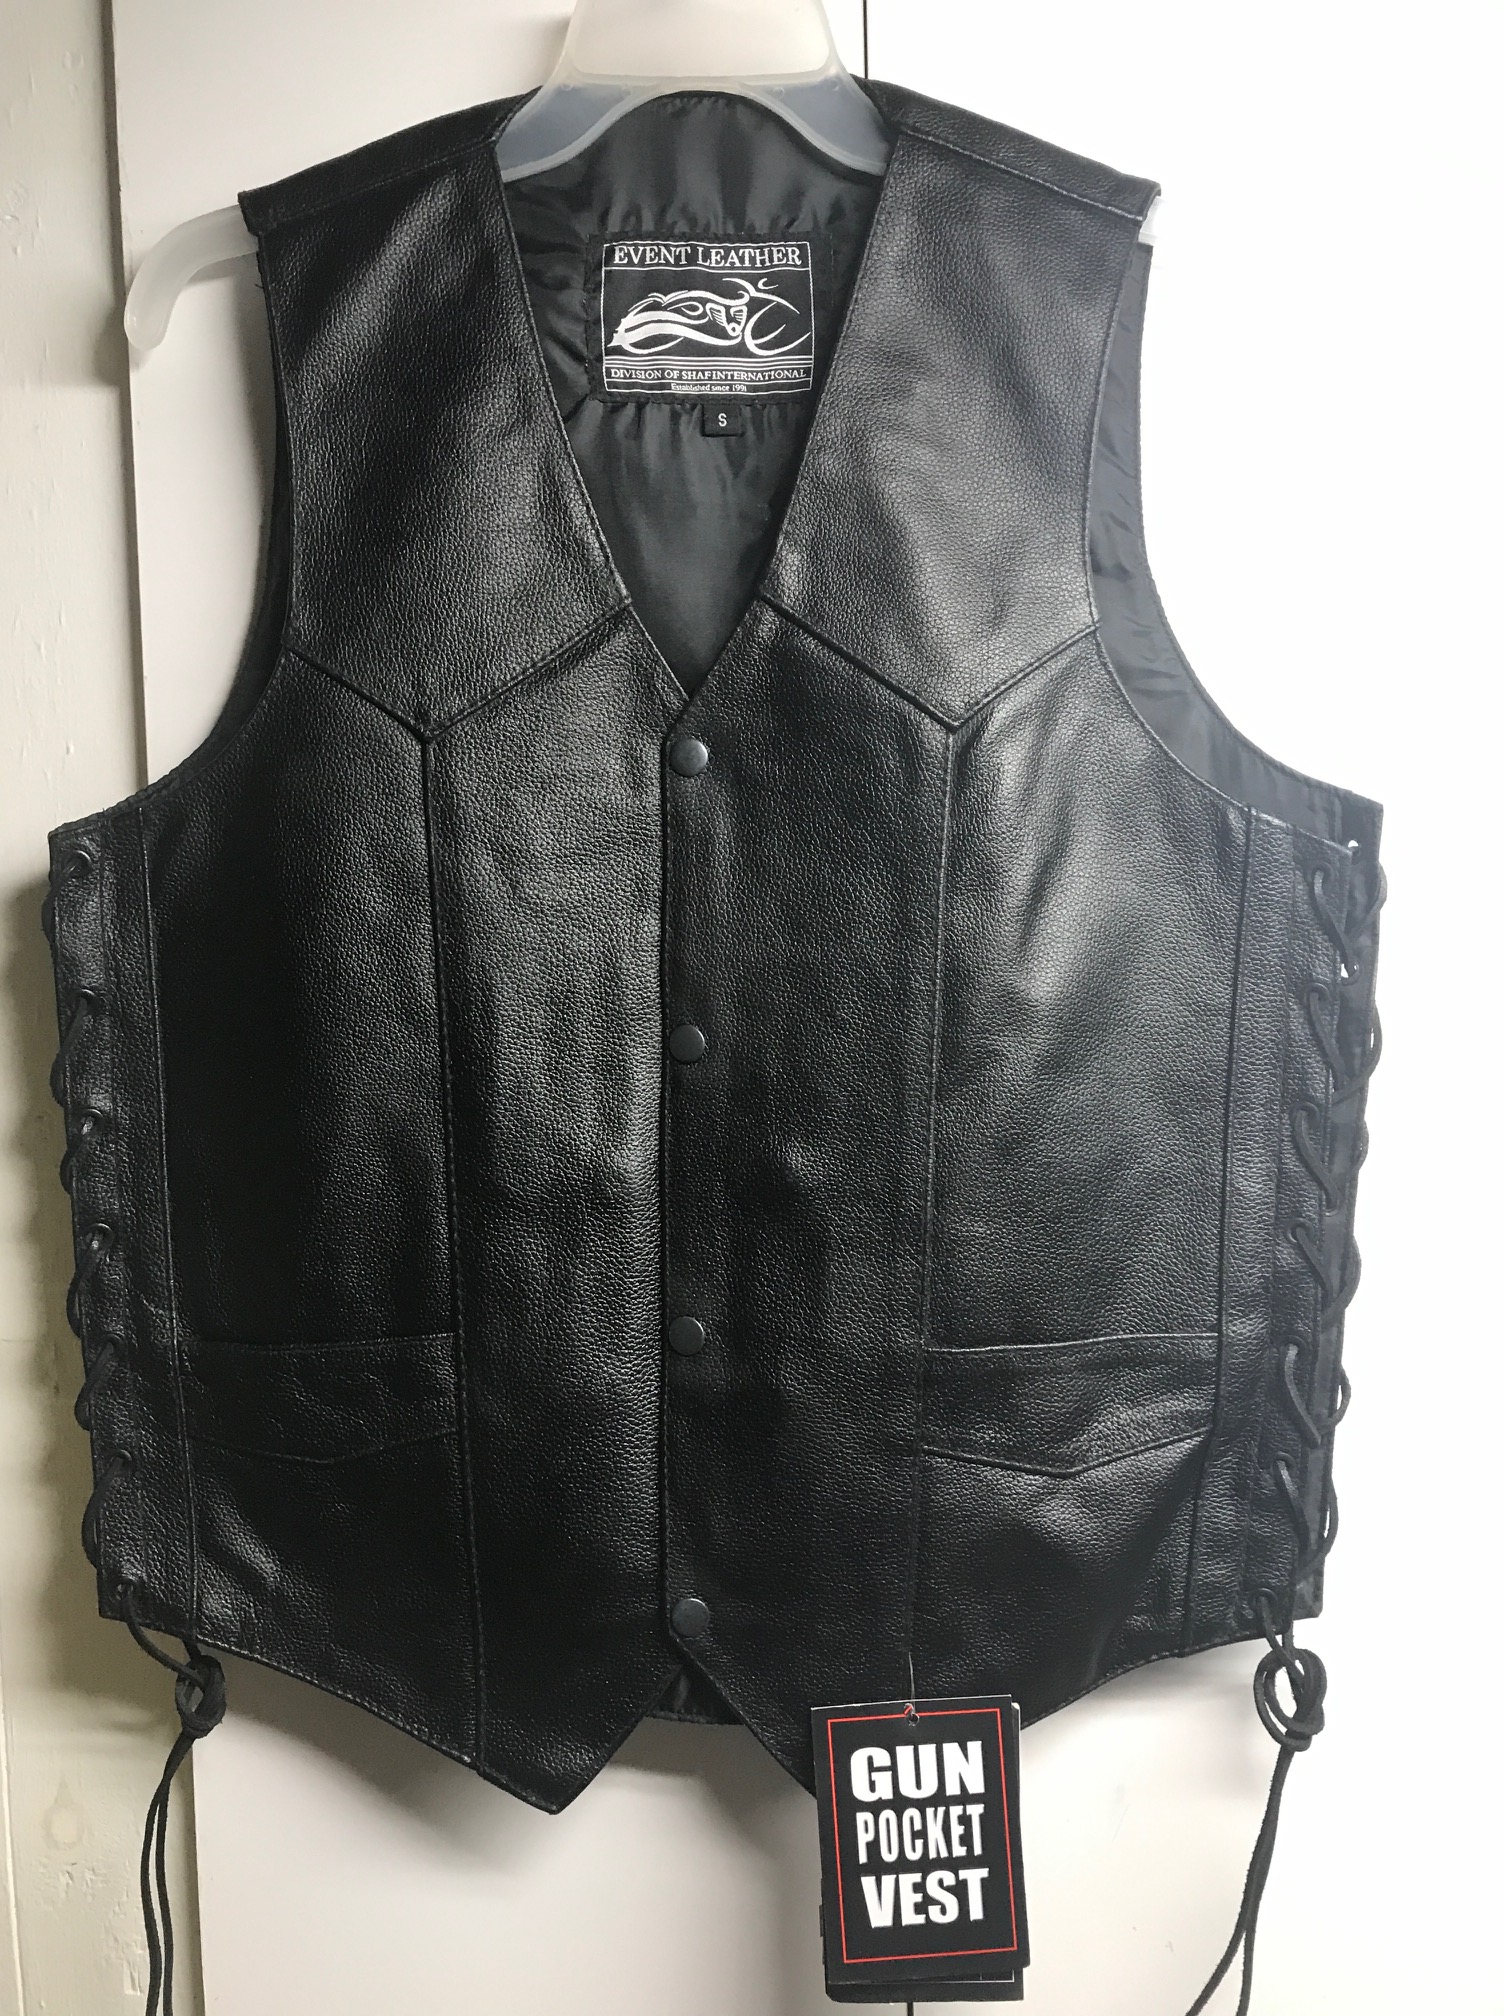 Black leather Gun Carry Vest 4XL - Native American Motorcycle